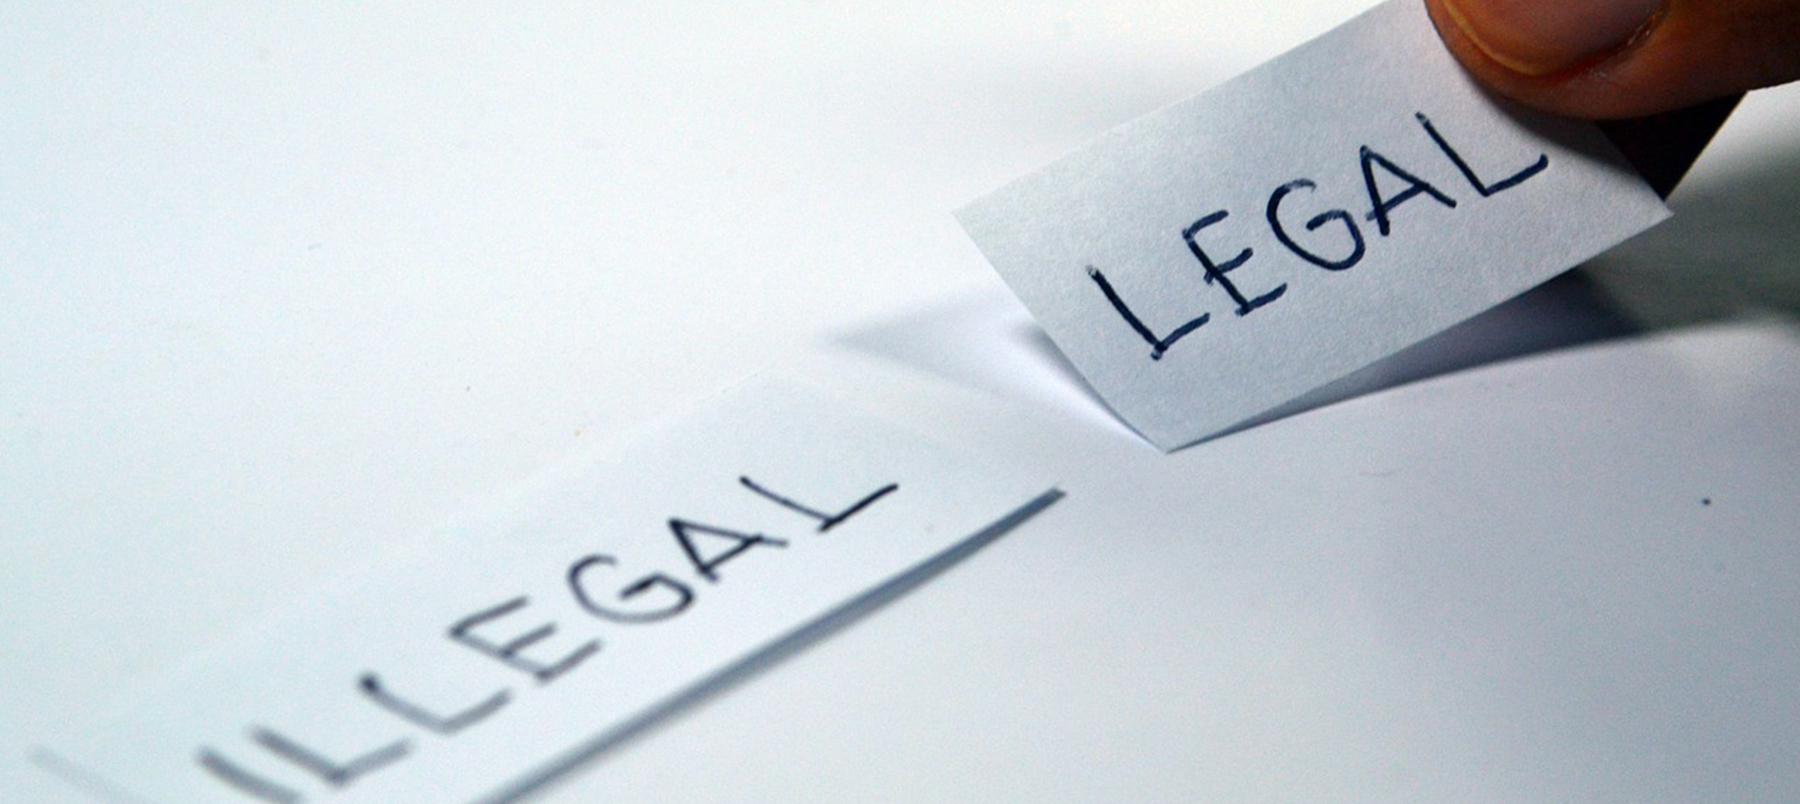 The word legal written by hand on a piece of paper